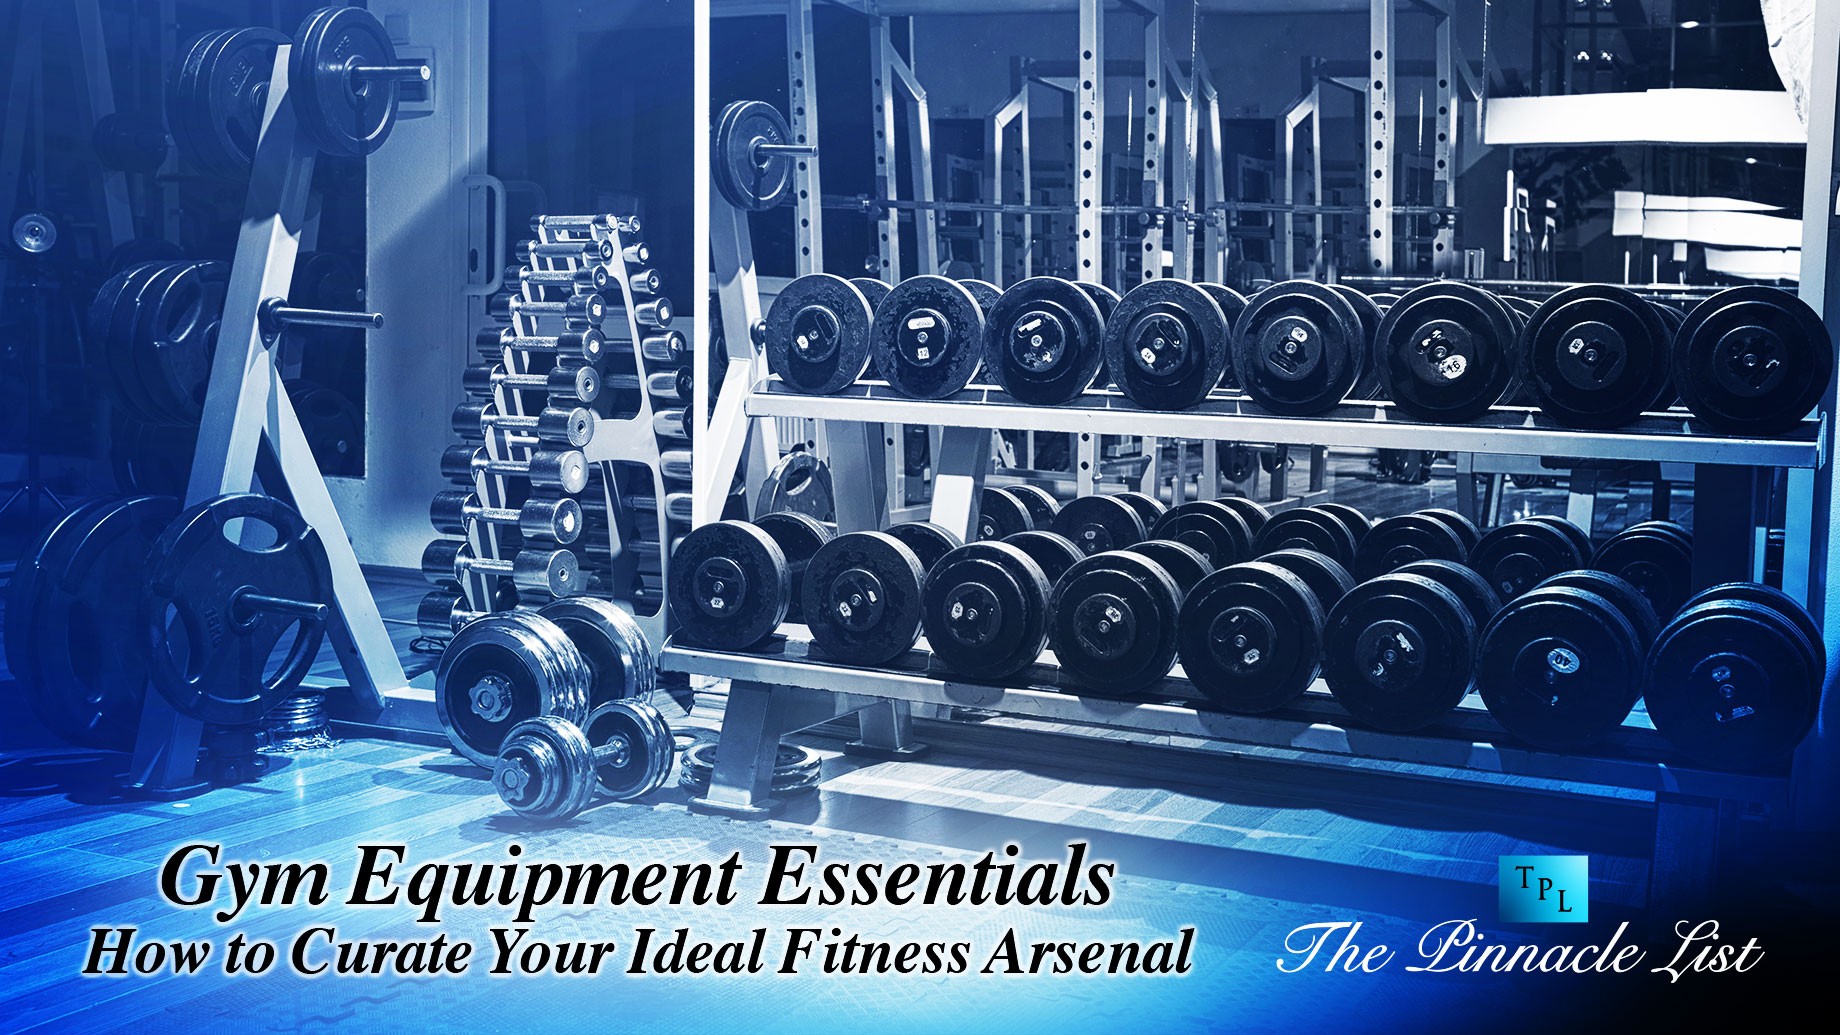 Gym Equipment Essentials: How to Curate Your Ideal Fitness Arsenal